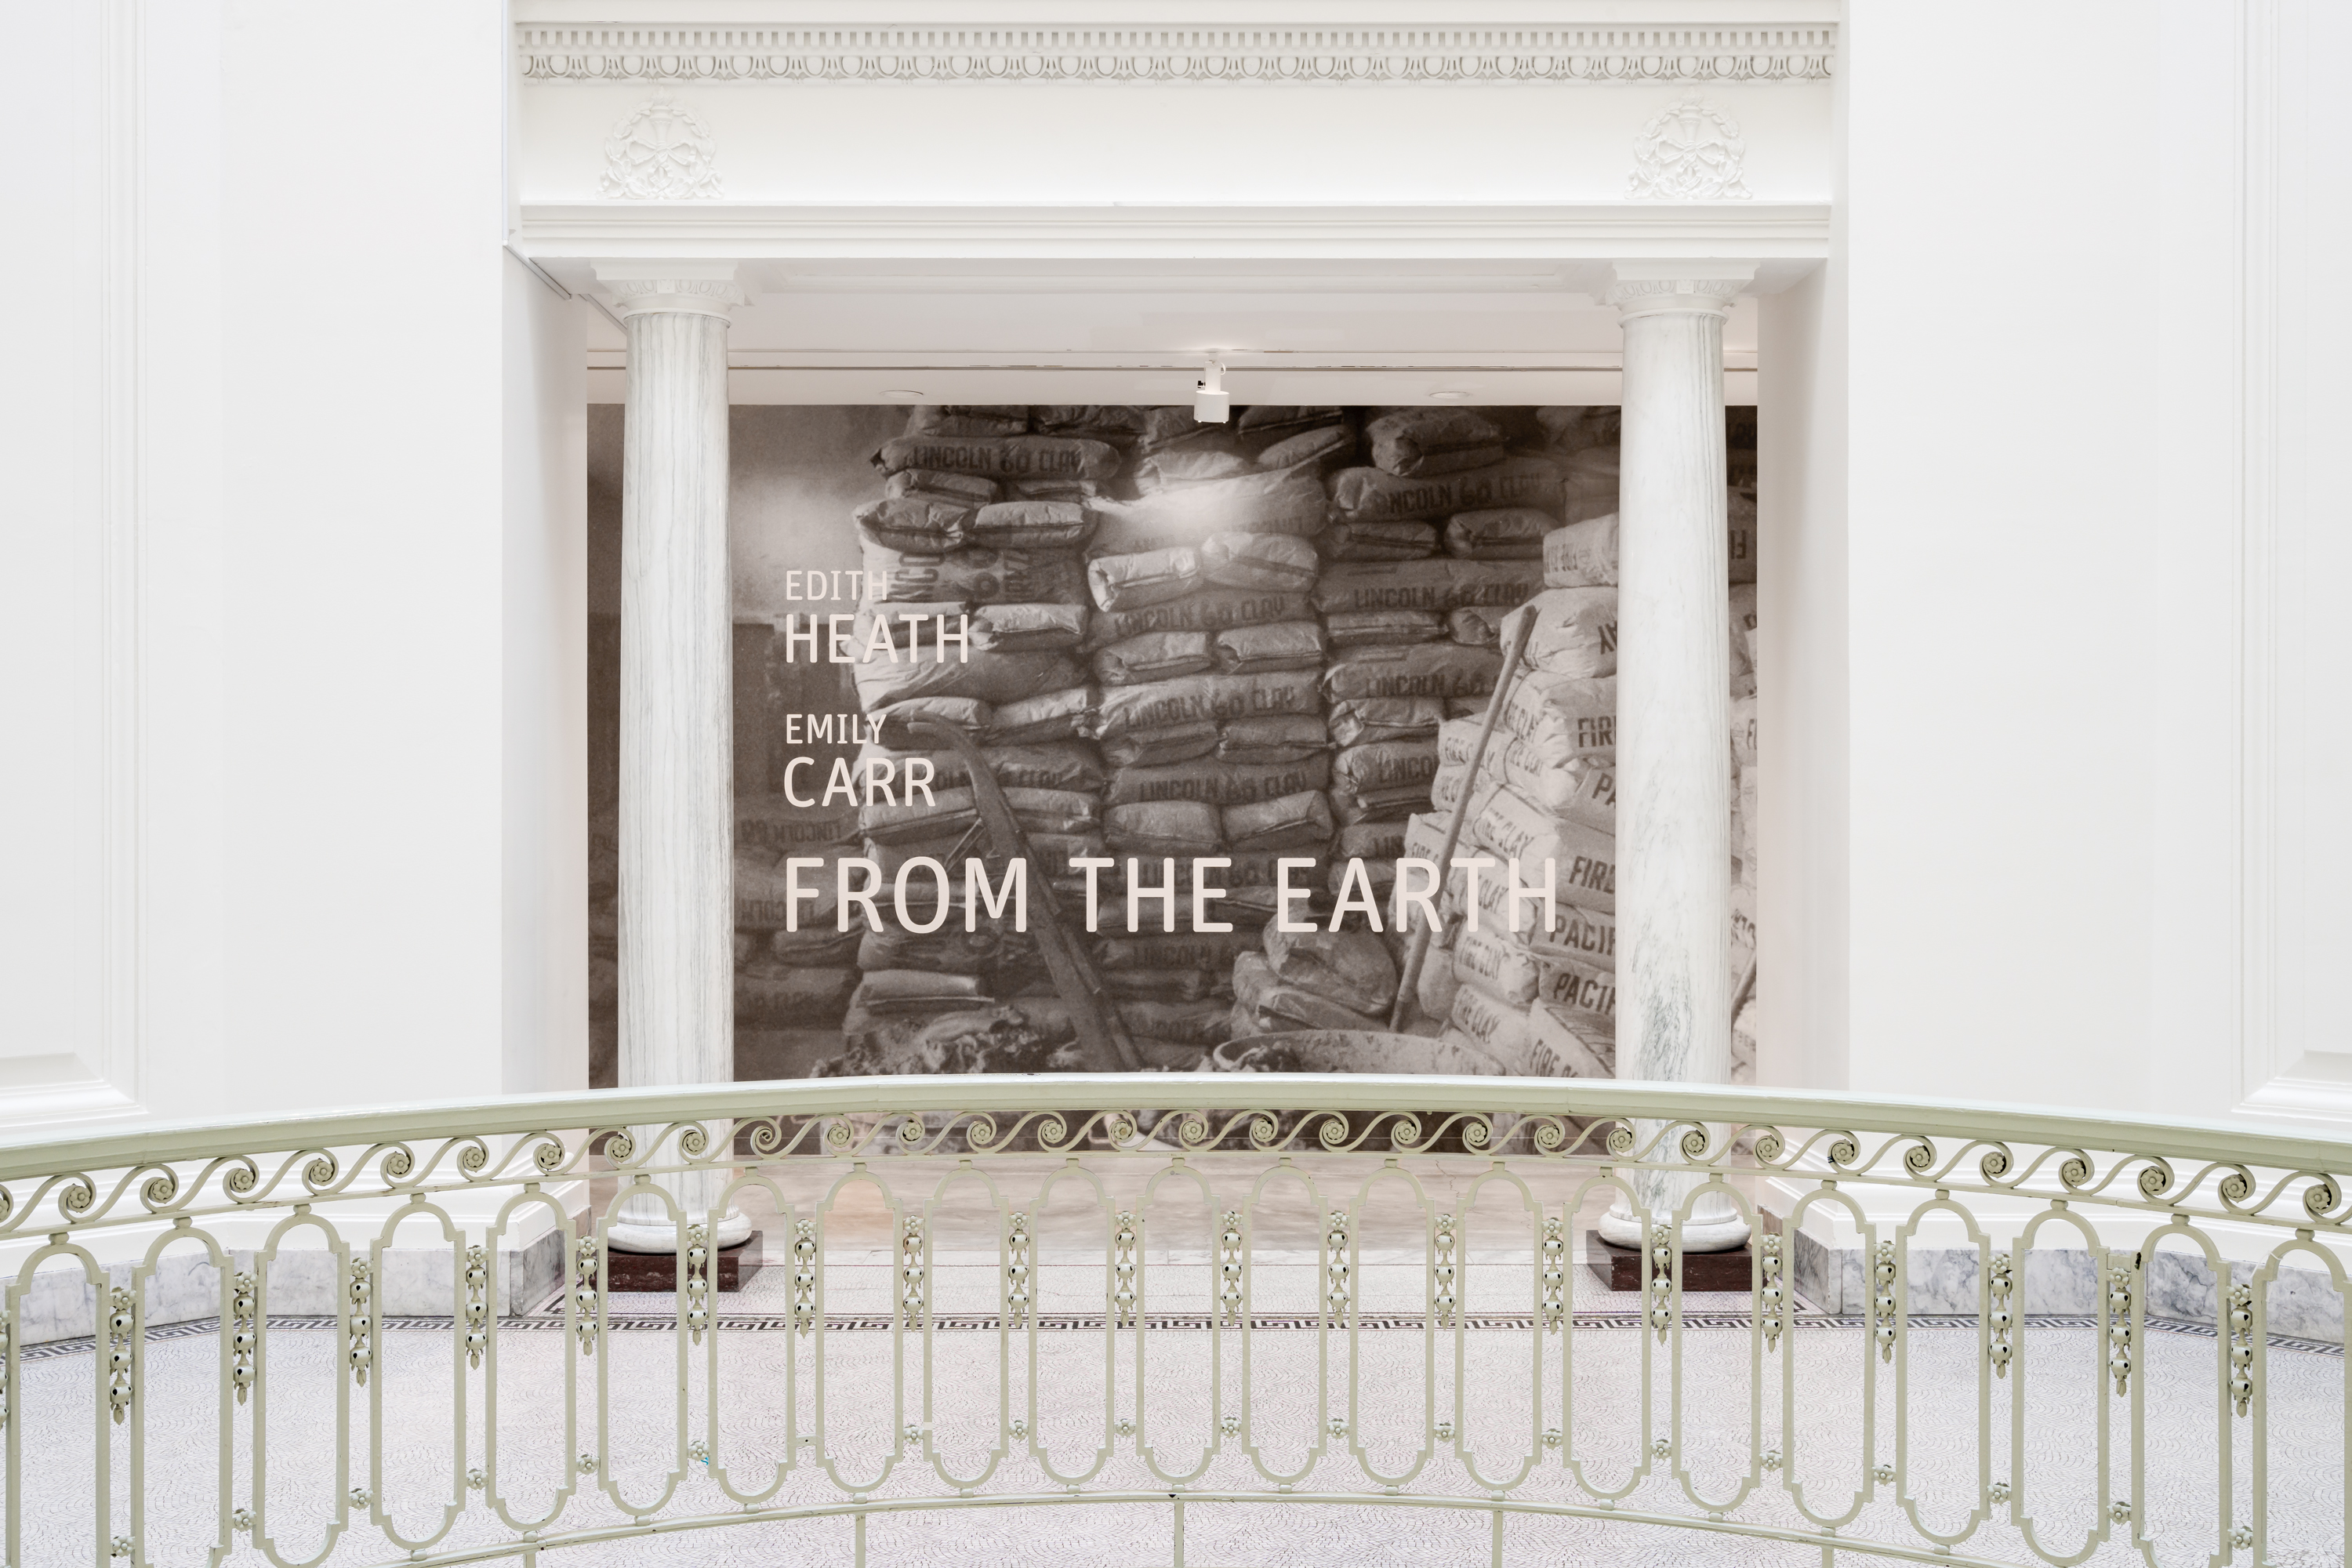 Installation view of the title mural of the exhibition, showing the architecture of the Gallery rotunda, with a rounded white banister.